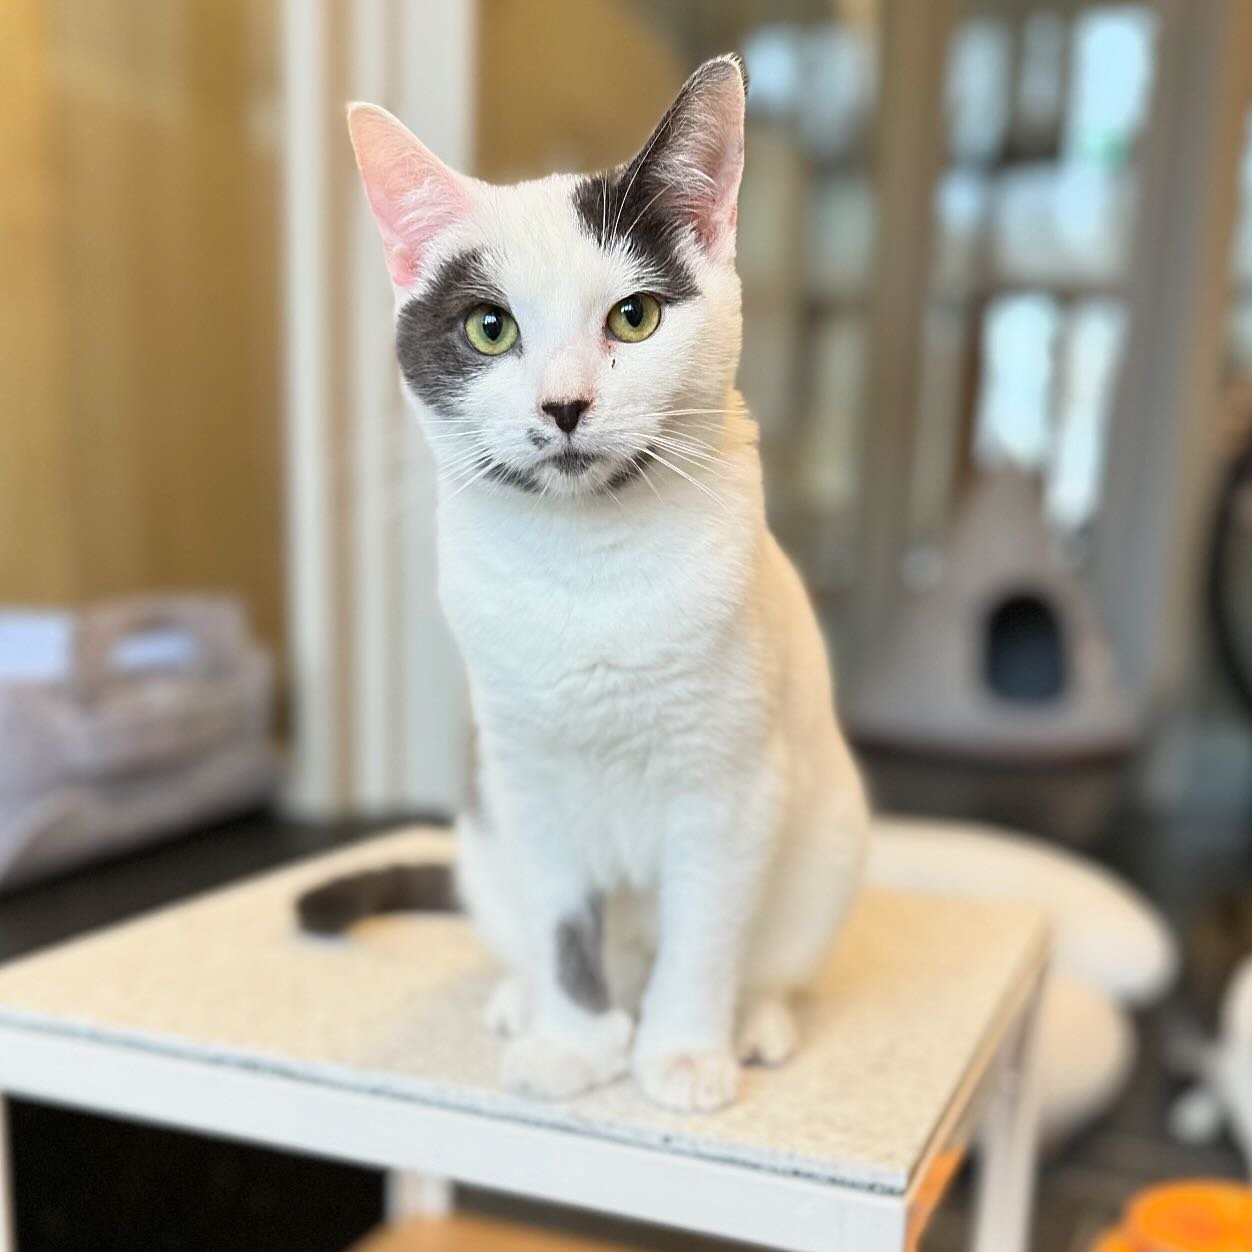 Fergus and his extra toes moved into the Cat Zone this morning! This sweetie is about eight months old. He&rsquo;s playful and active but also seems to have the makings of a lap cat&hellip; 😺😺 #buckminsterscatcafe #adoptdontshop #foreverhomeneeded 